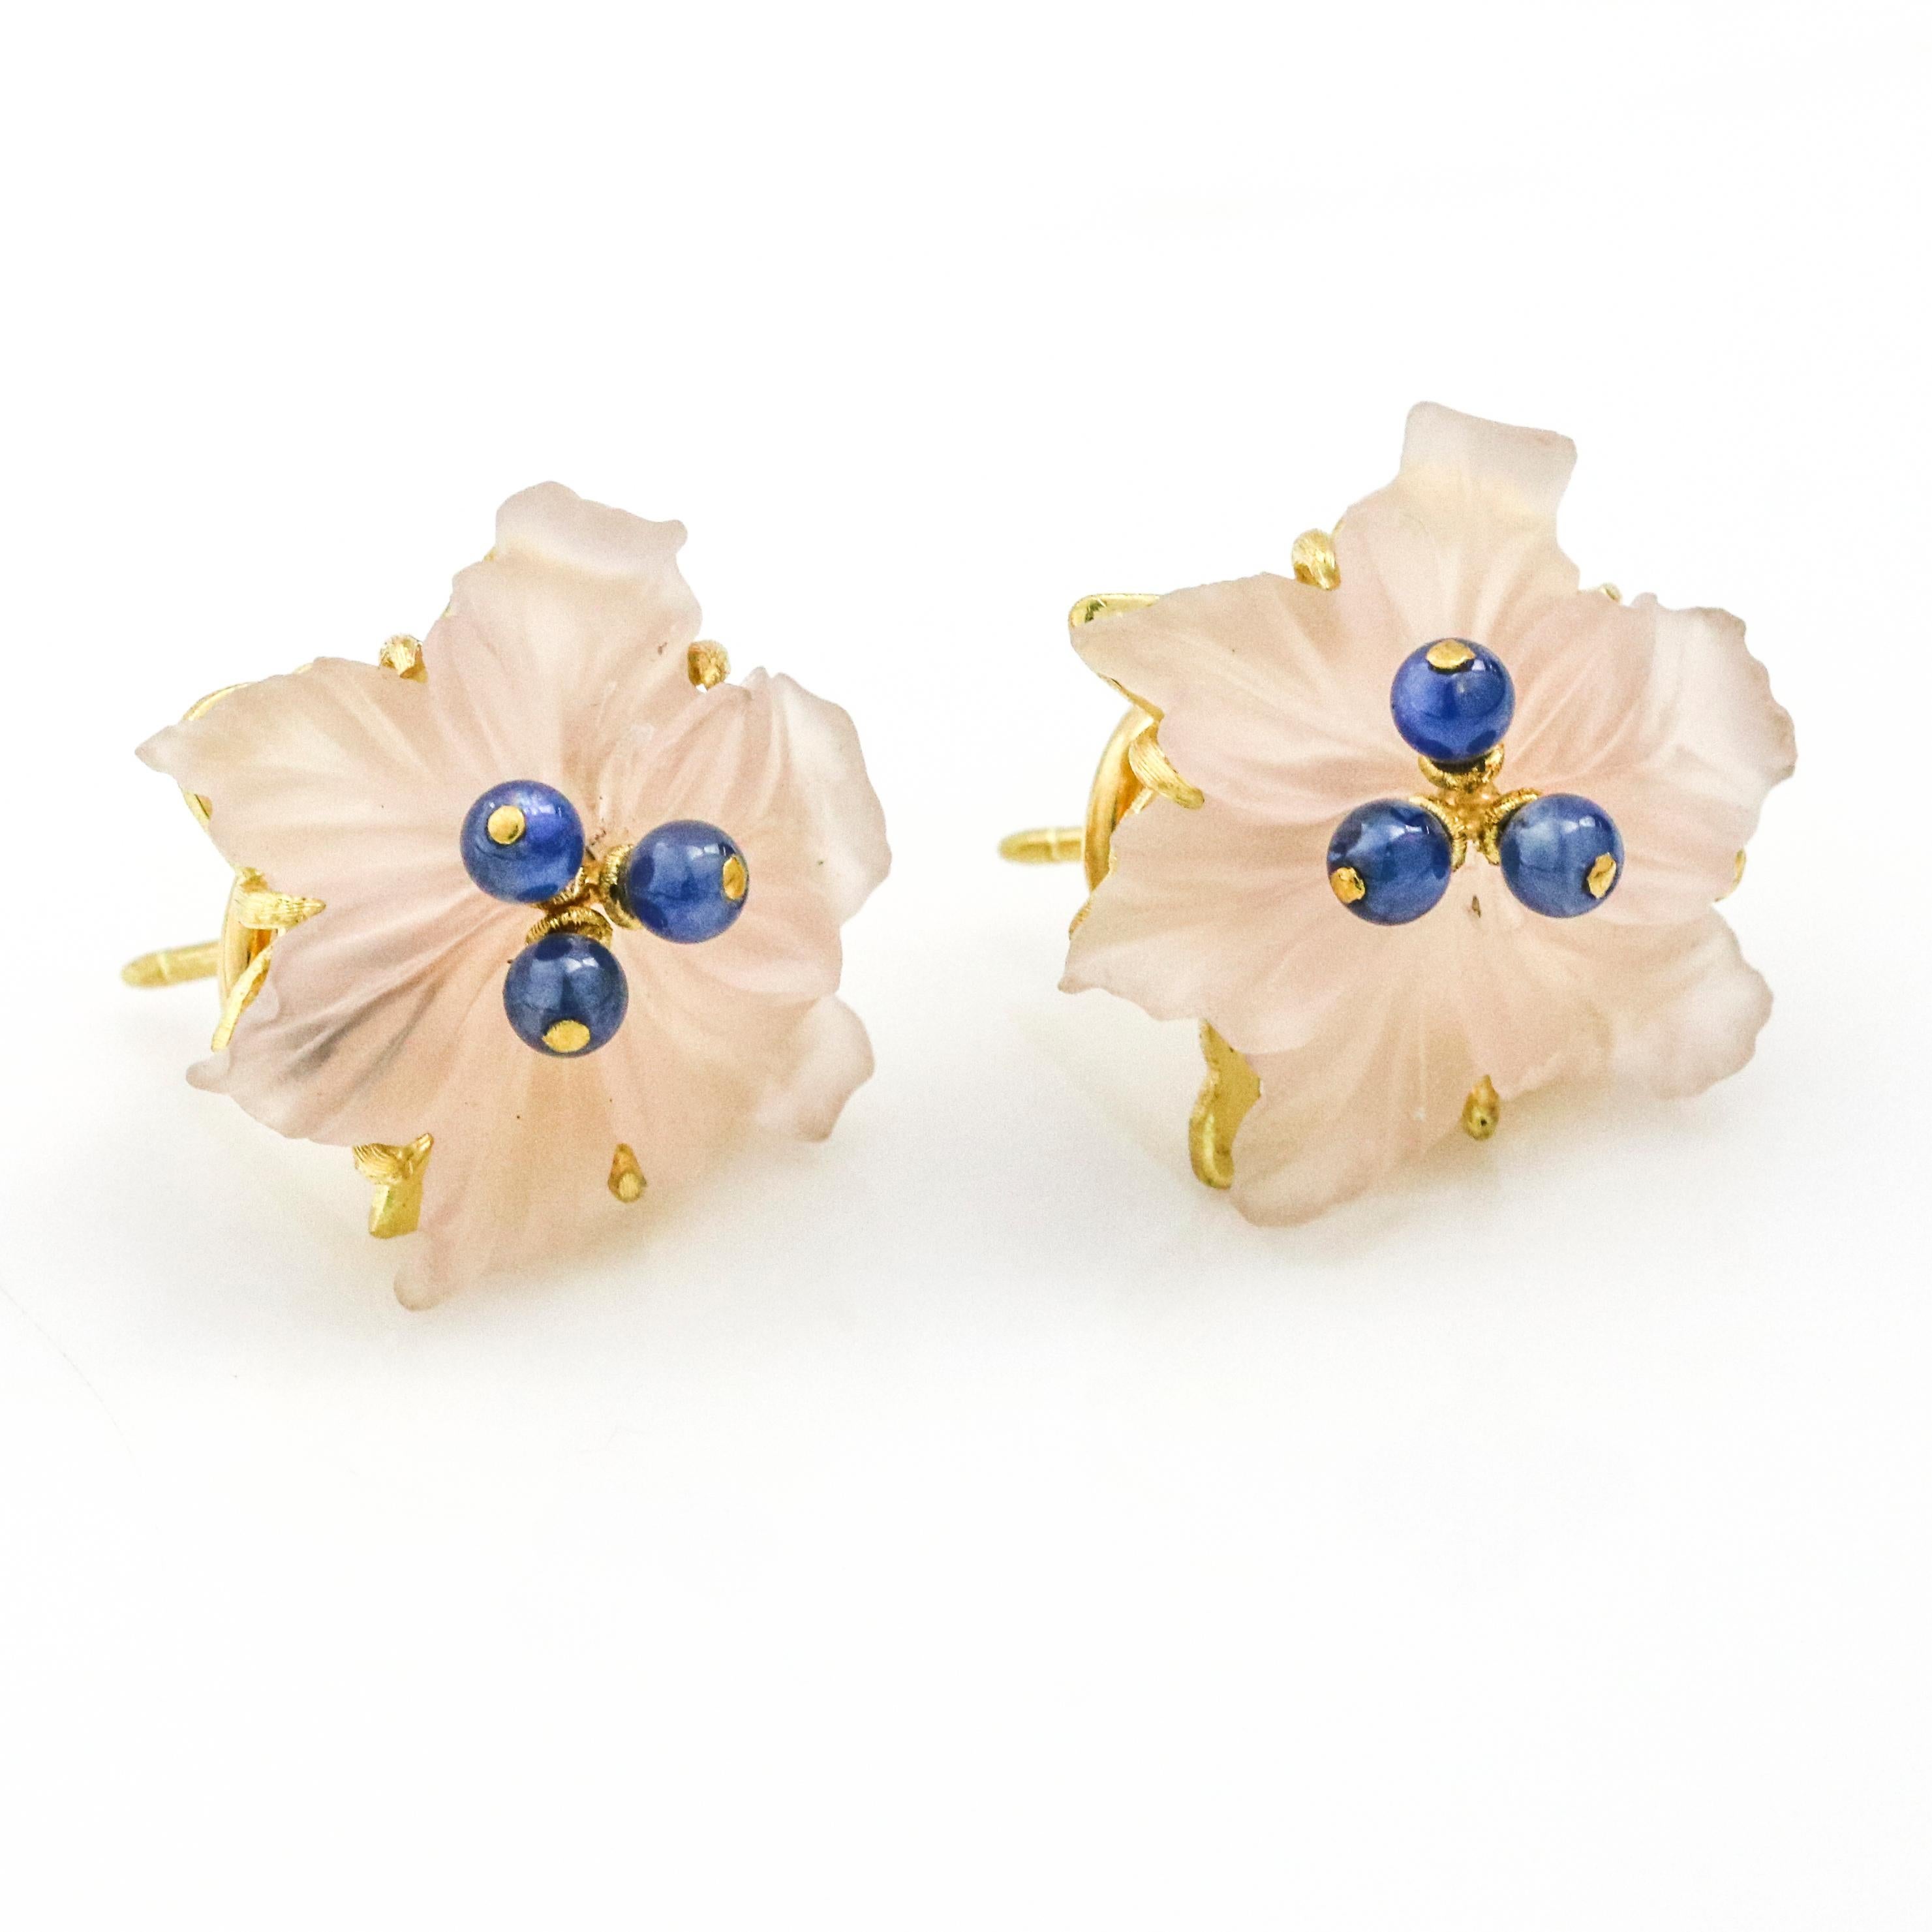 Buccellati 18 Karat Yellow Gold Carved Rose Quartz Sapphire Flower Stud Earrings In Good Condition For Sale In Fort Lauderdale, FL